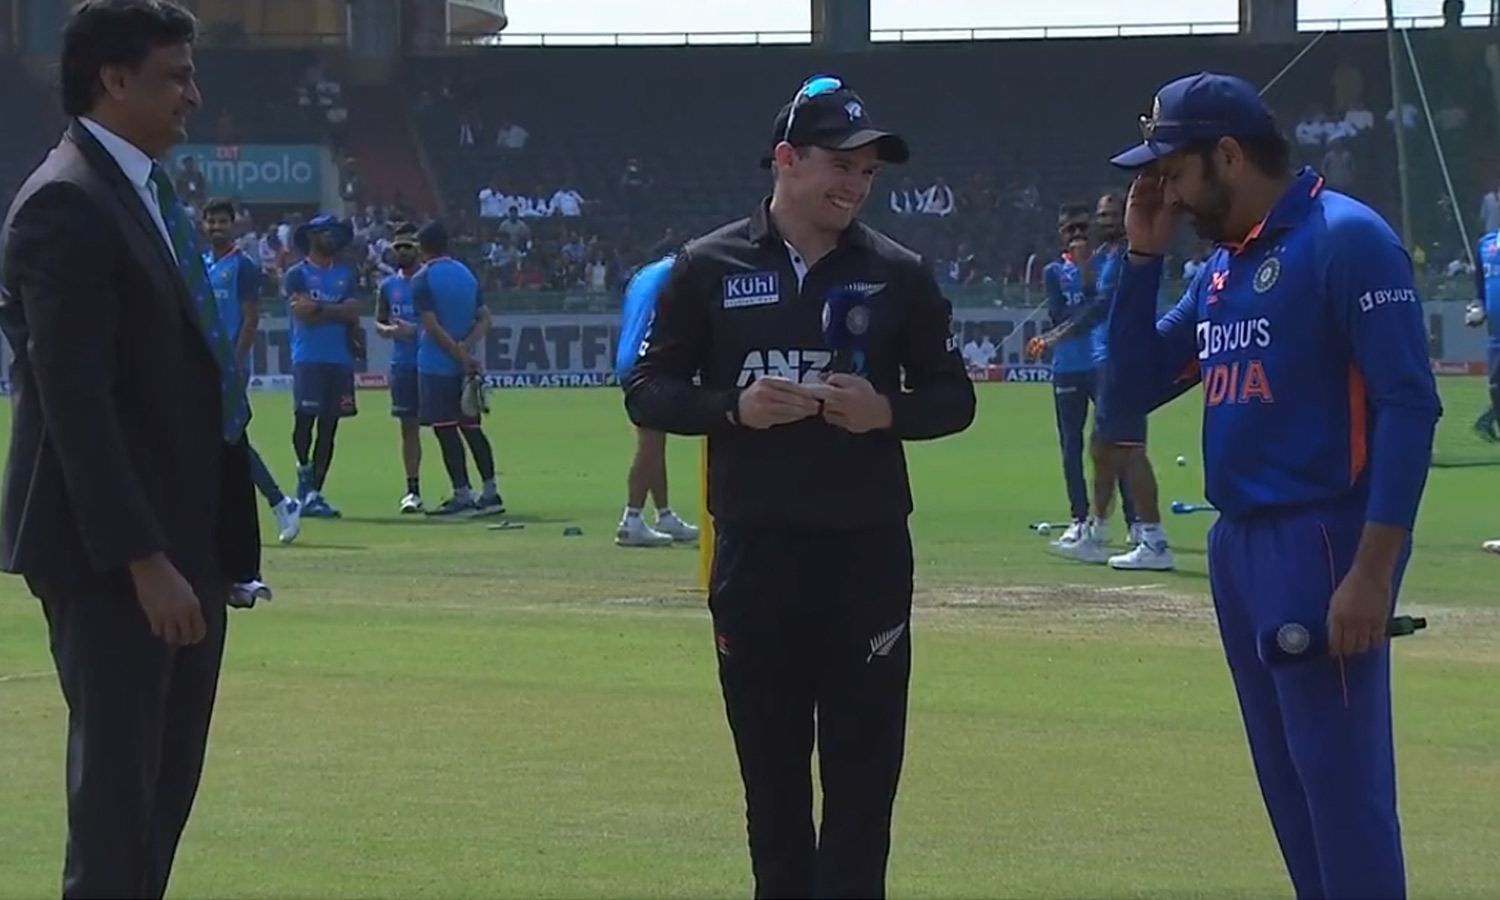 Rohit Sharma’s action after winning the toss makes me laugh: Video going viral